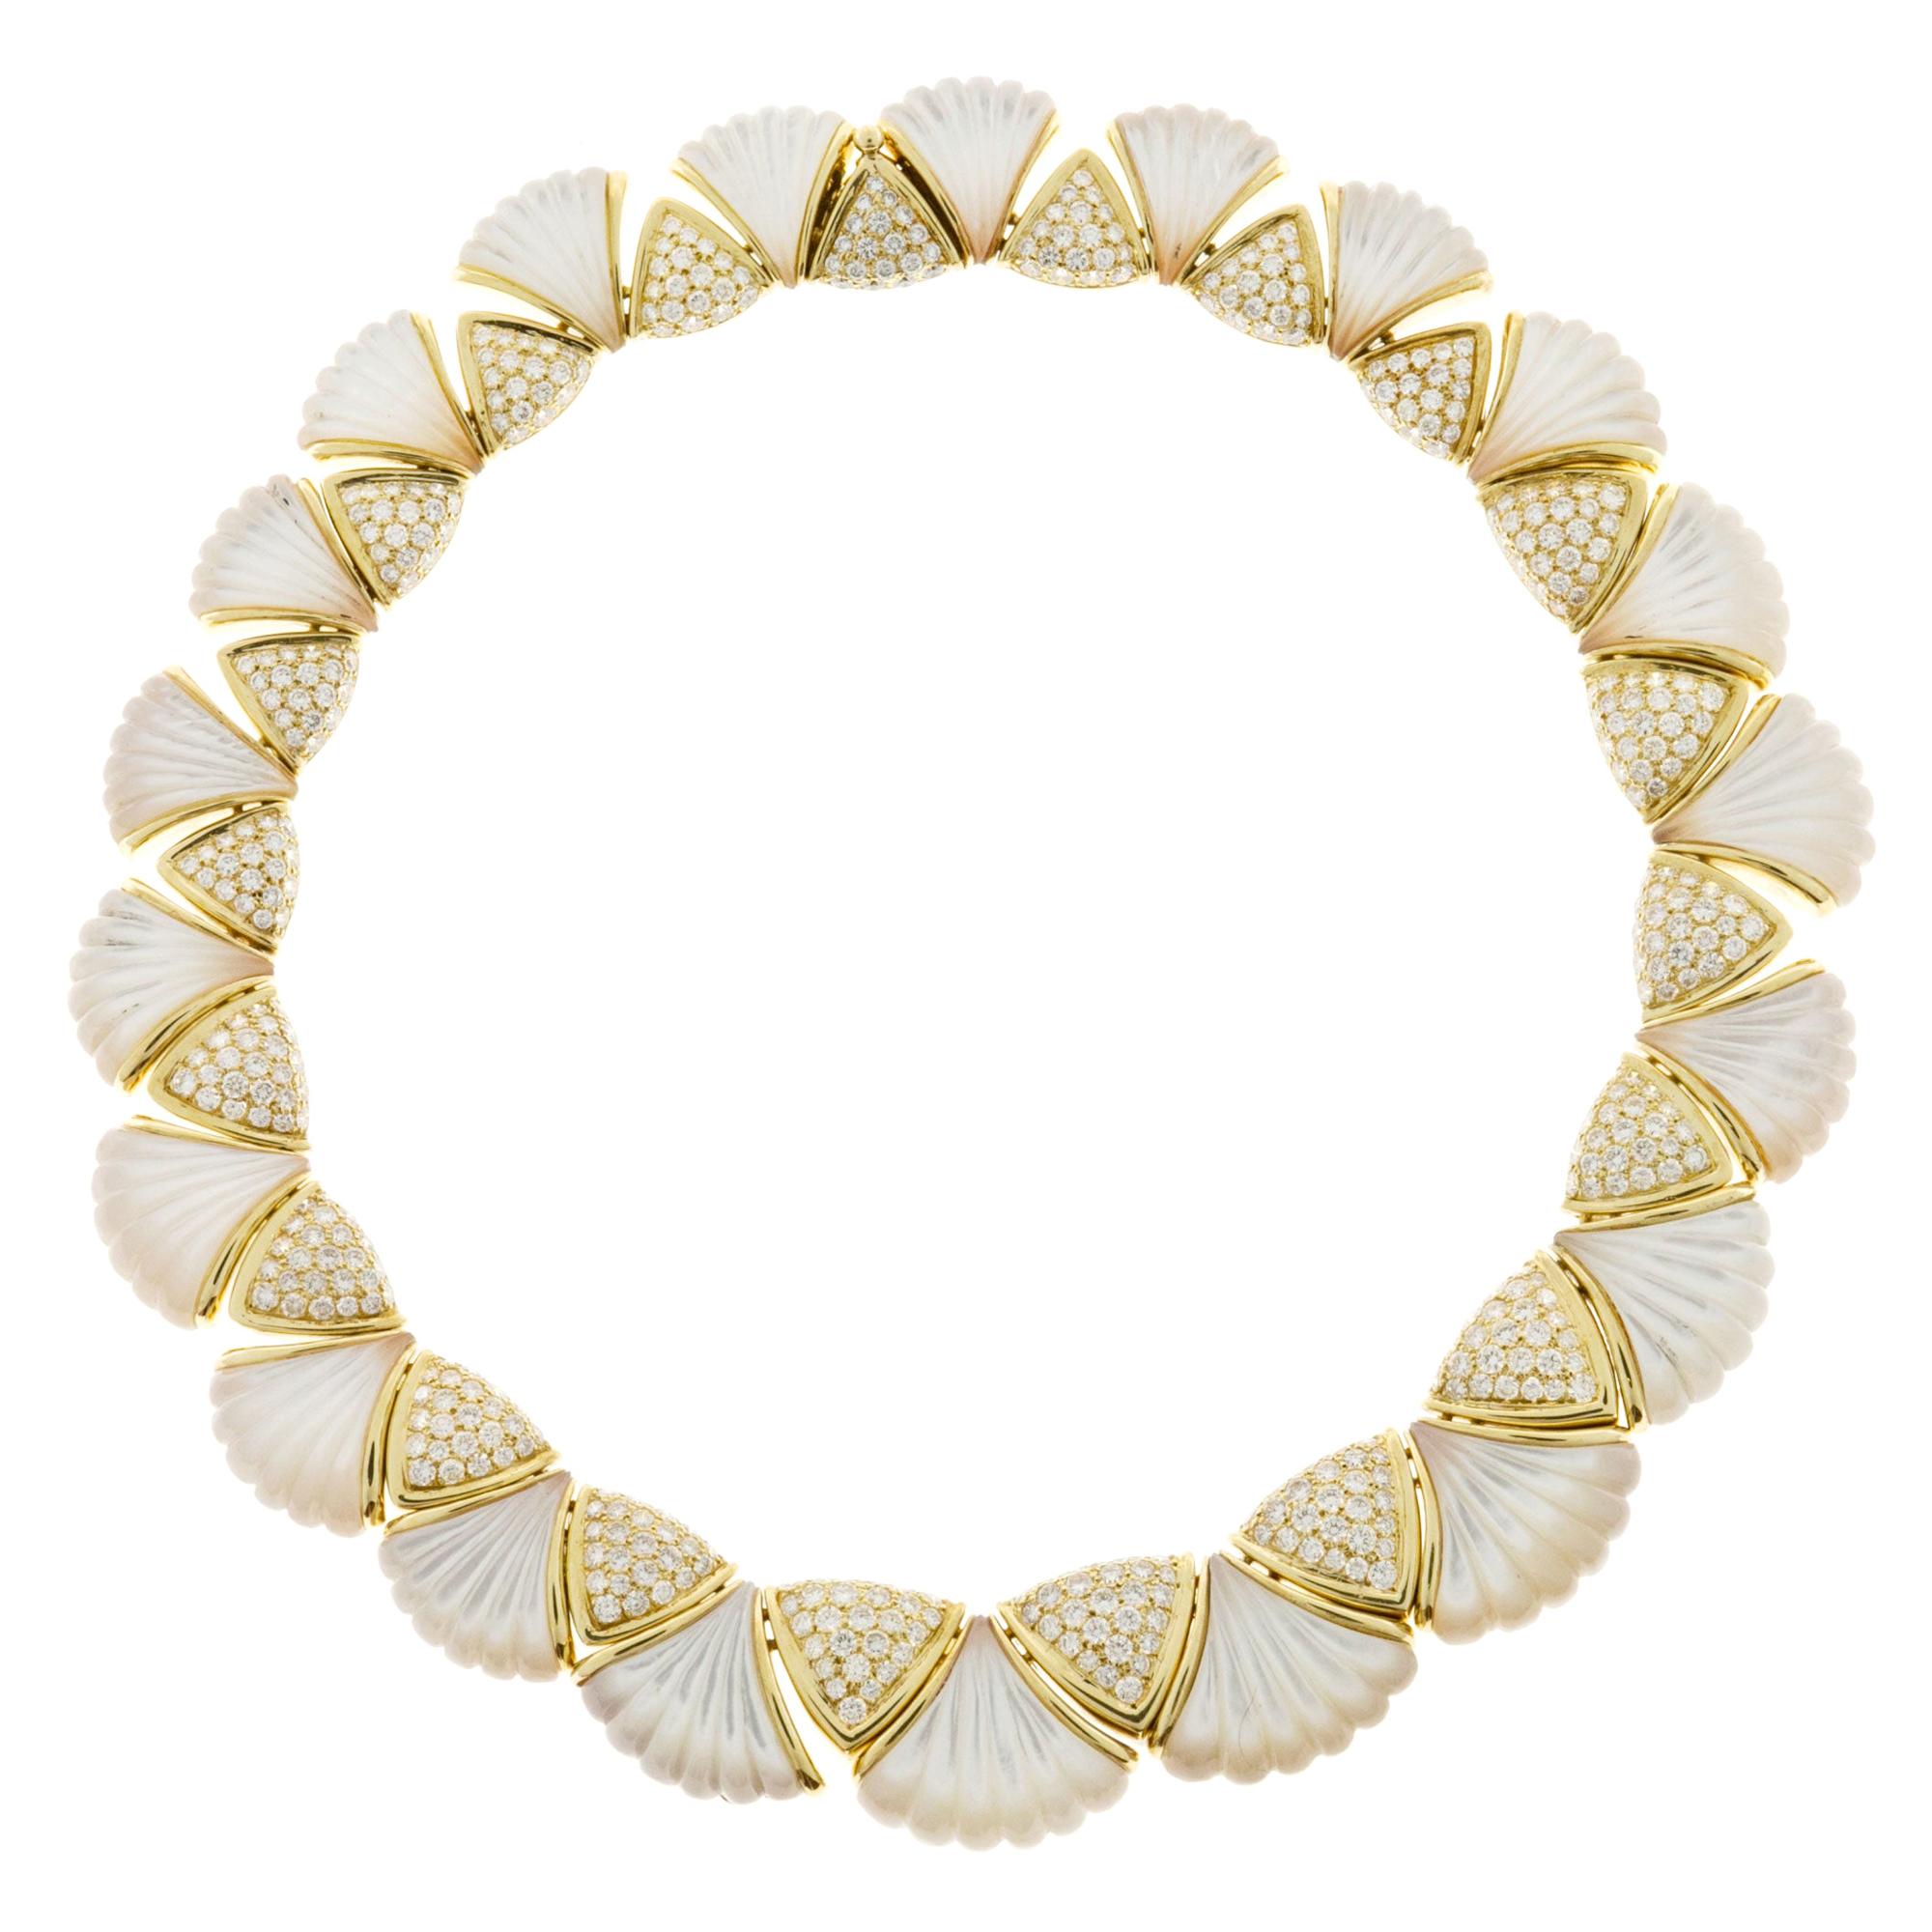 Gemlok Diamond Mother of Pearl Gold Necklace﻿